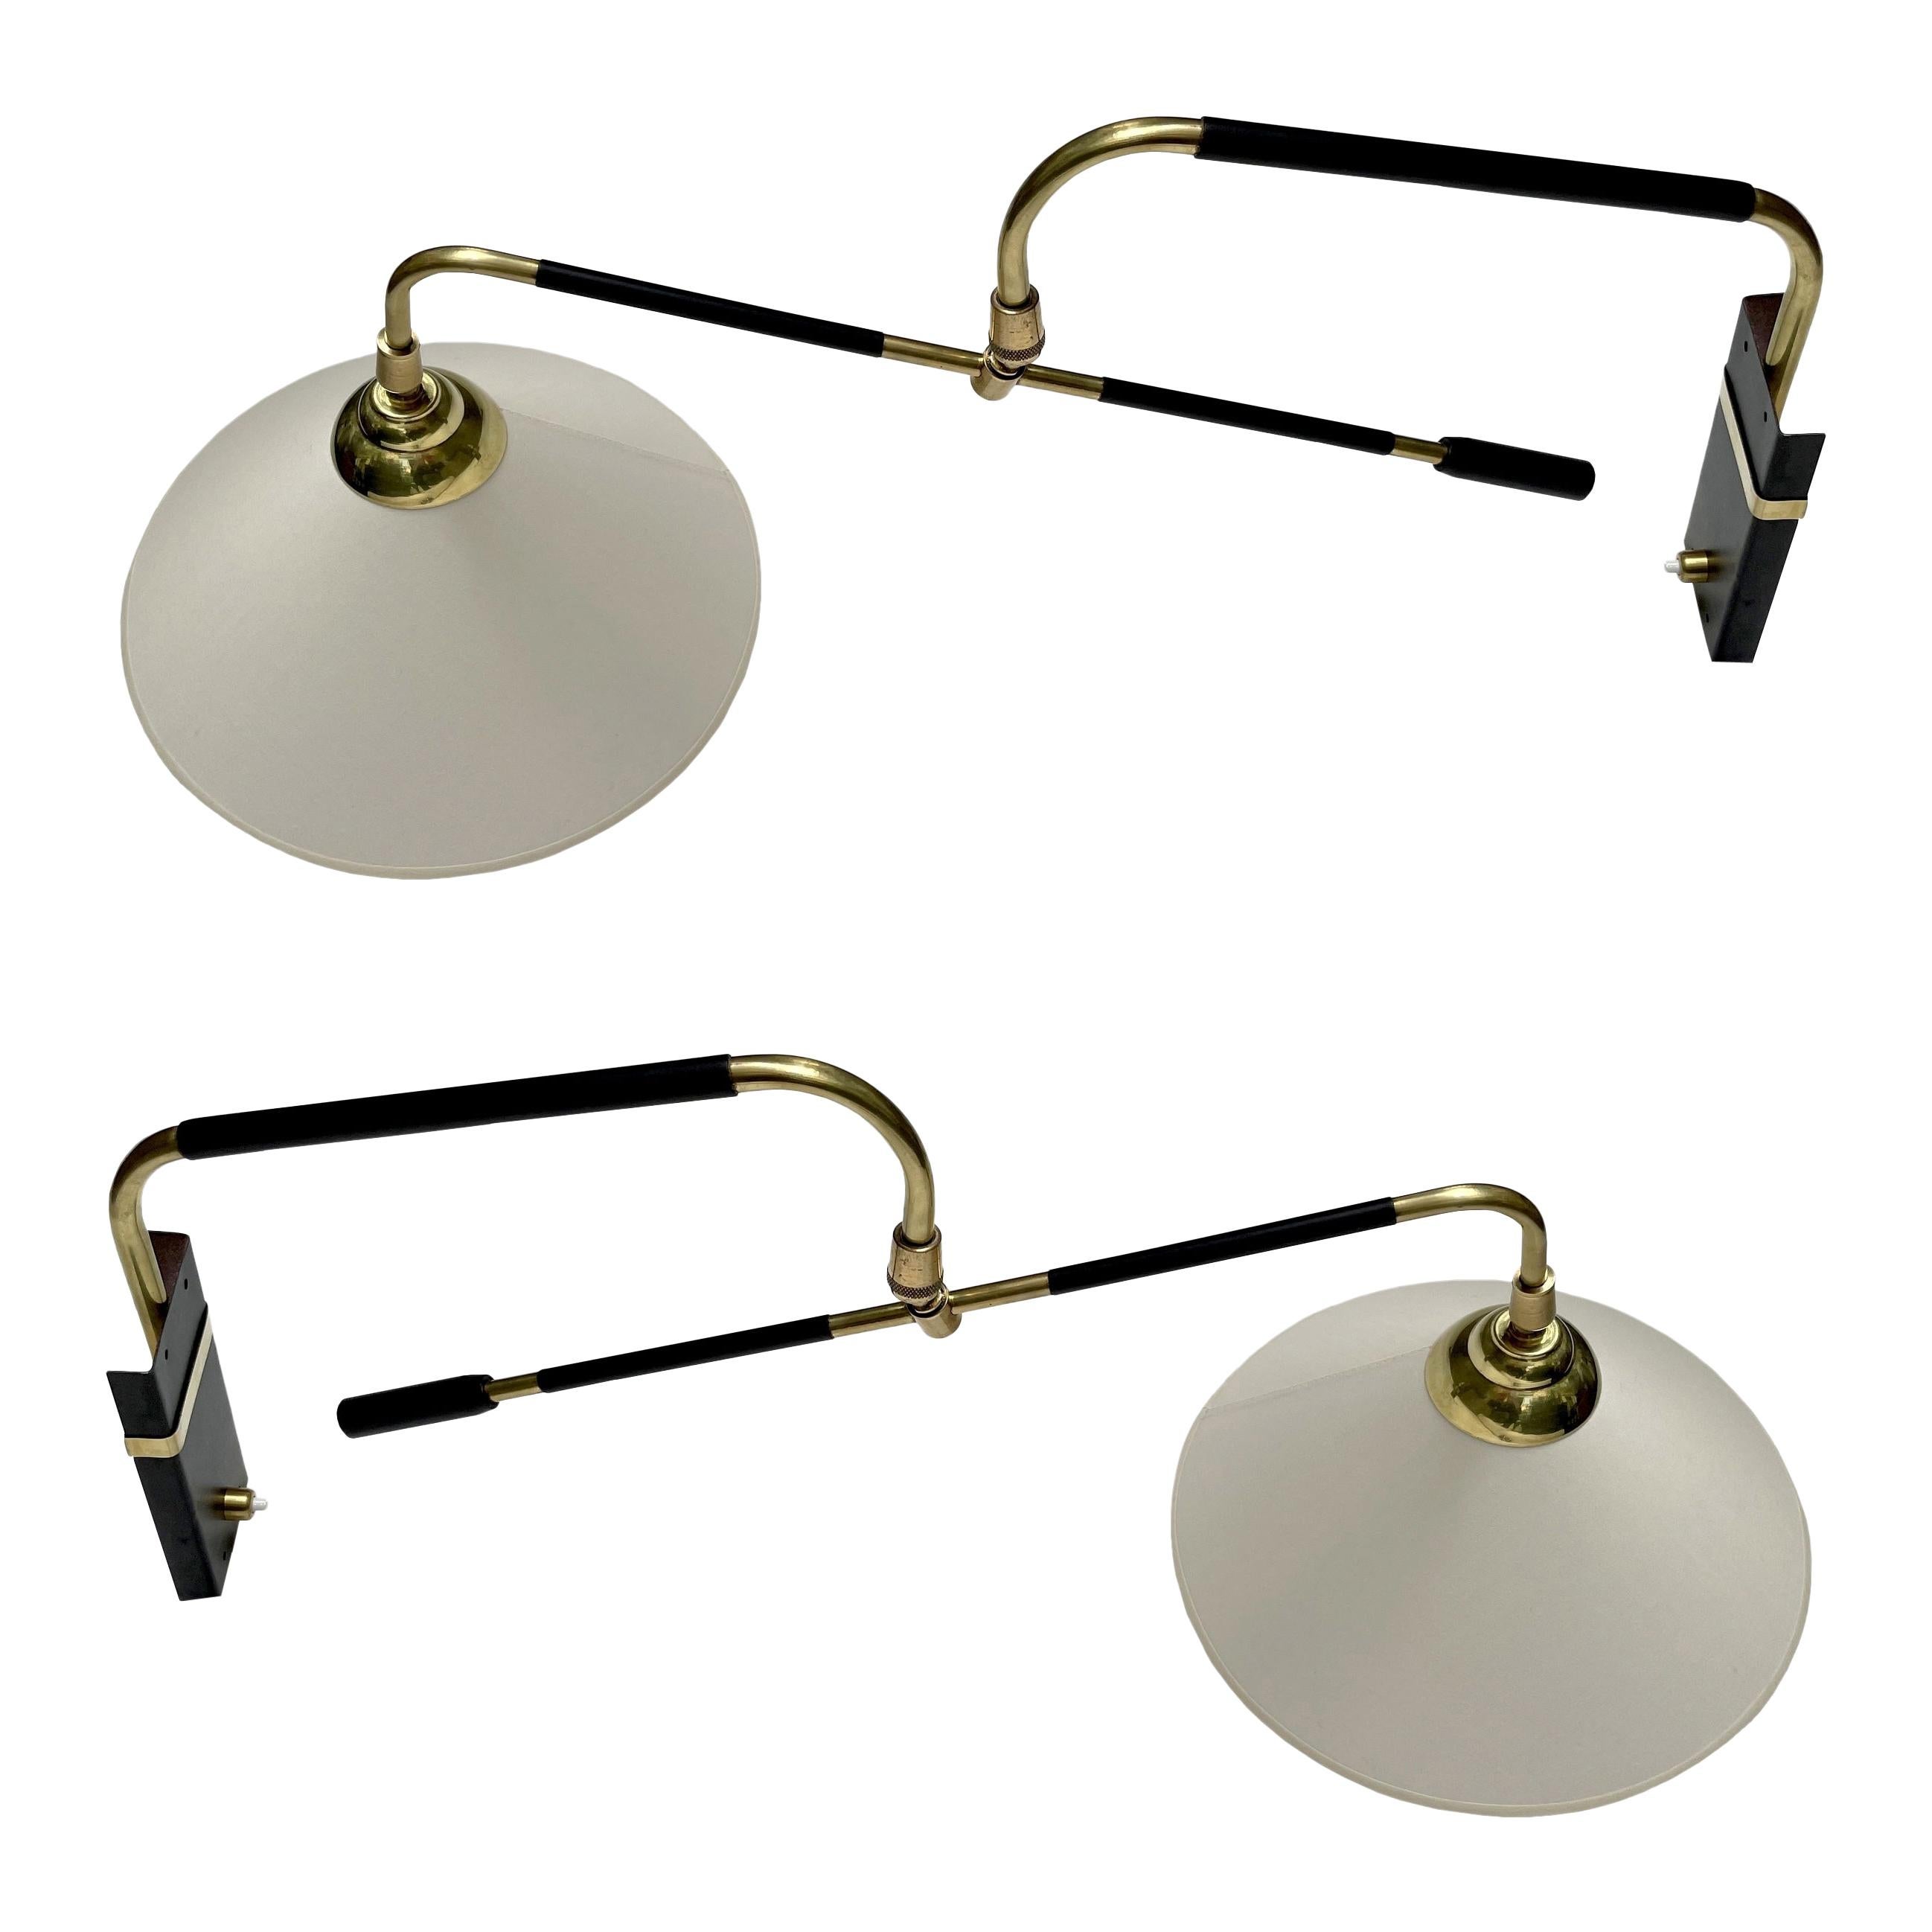 Pair of Articulated Sconces, France, circa 1950